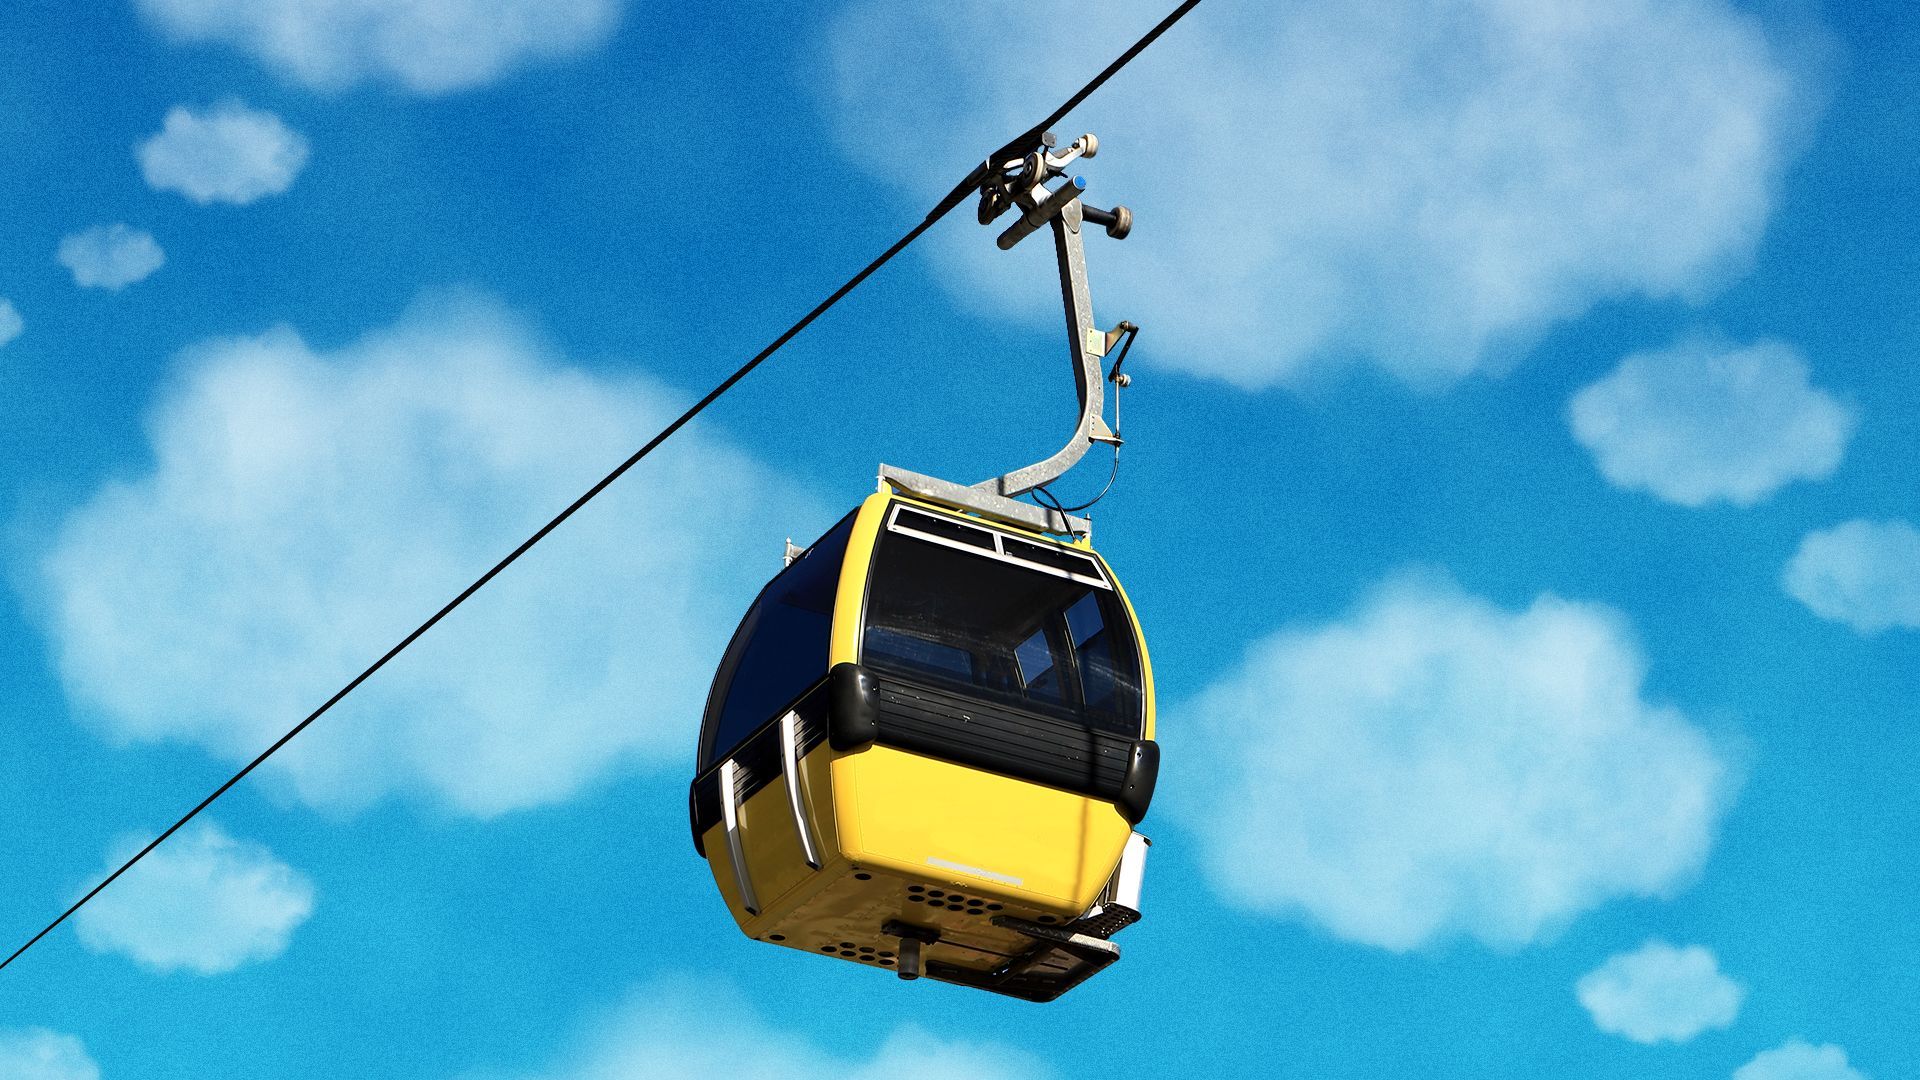 an illustration of a gondola on a cable surrounded by thought bubble shaped clouds